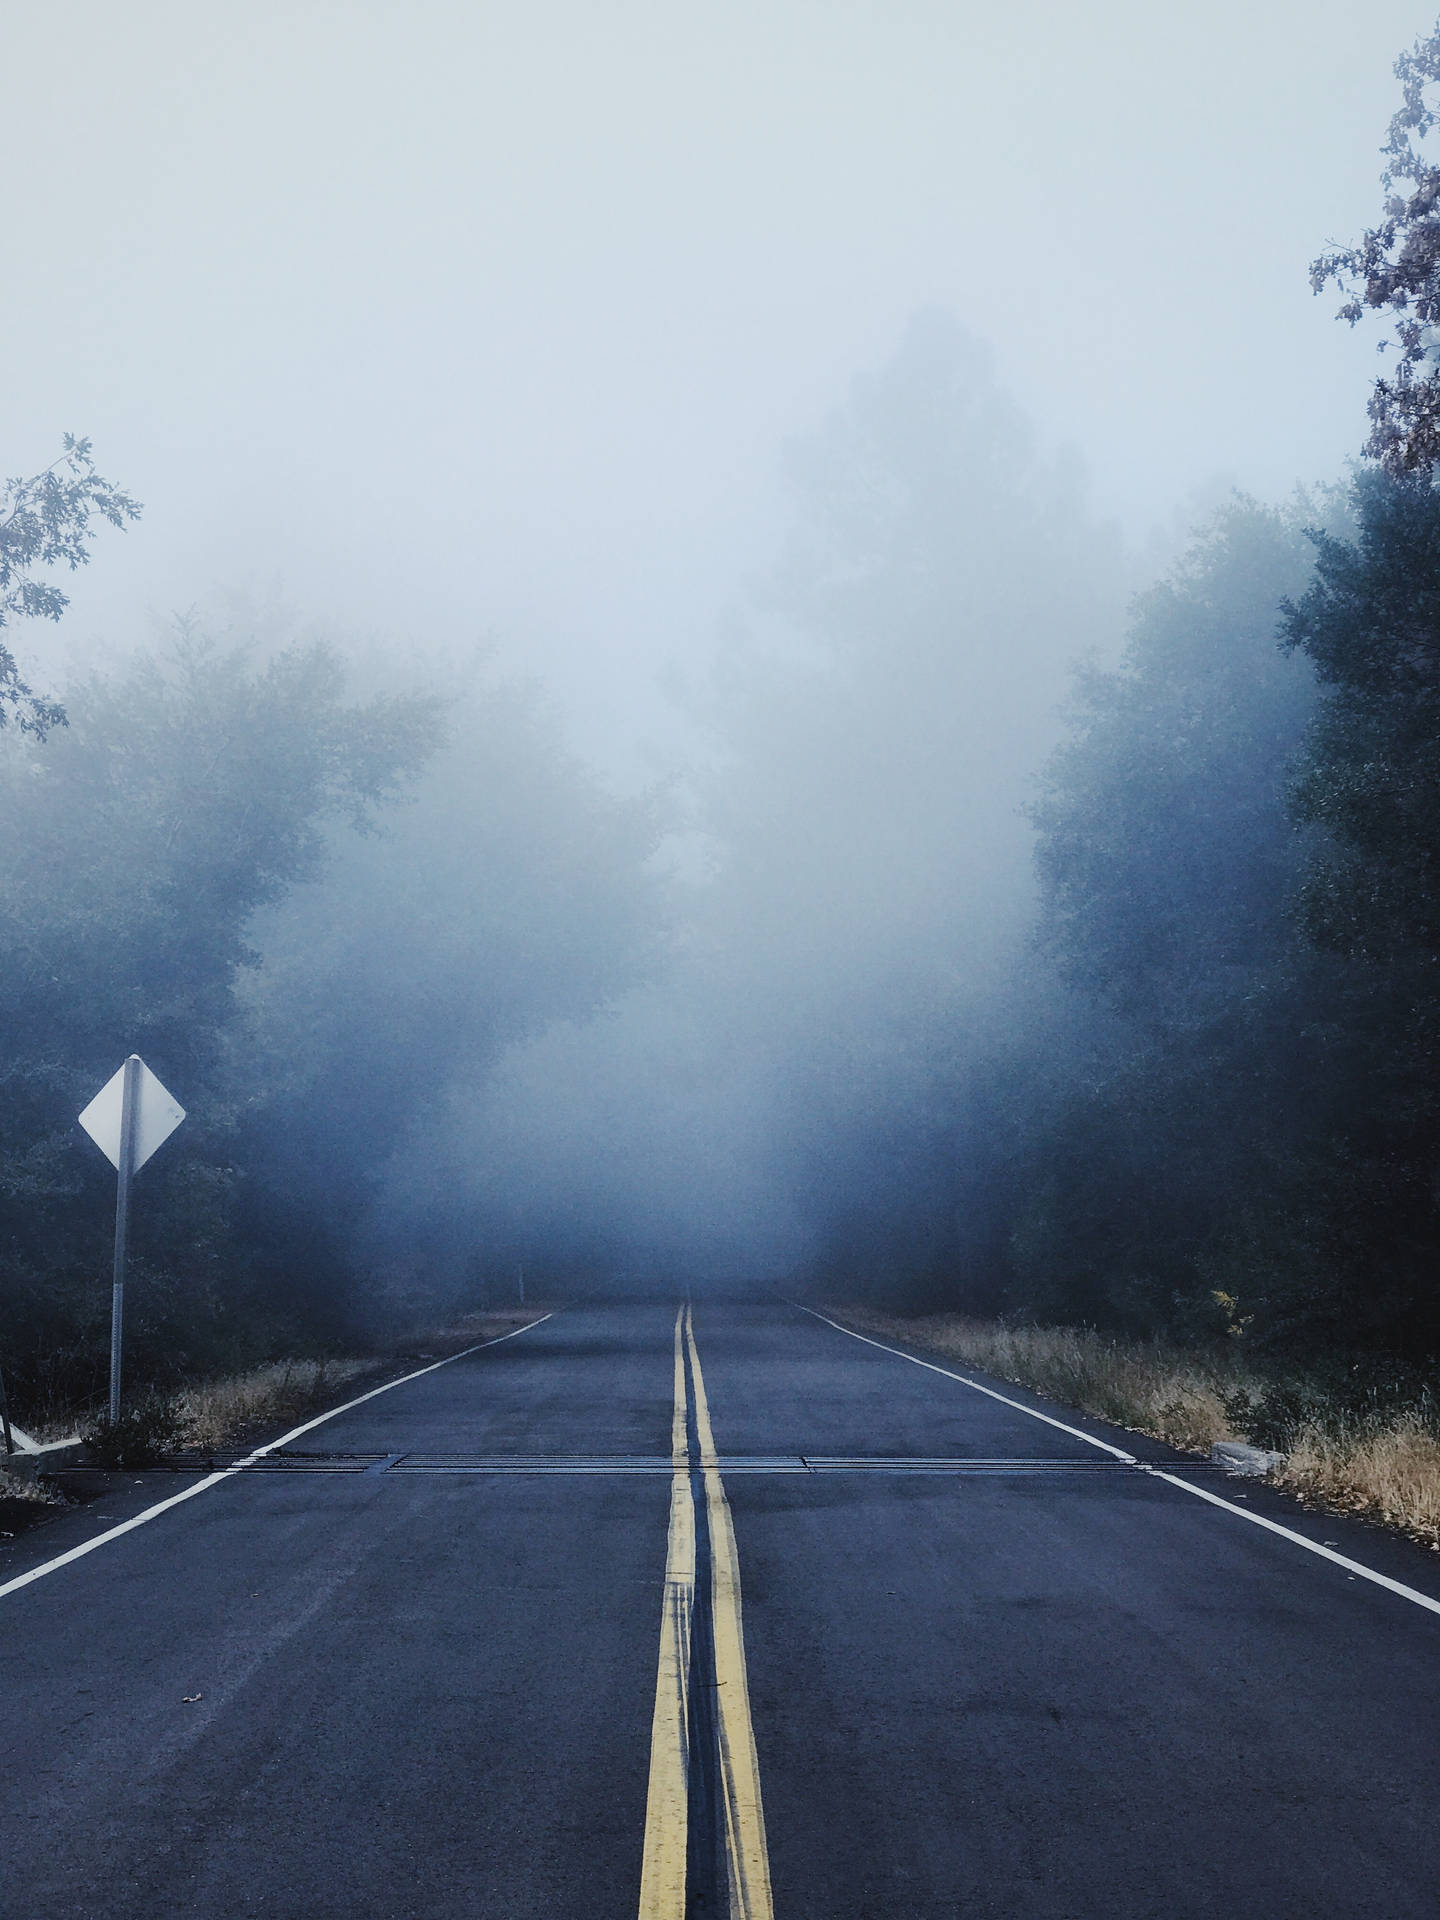 Ominous Foggy Road In The Daytime